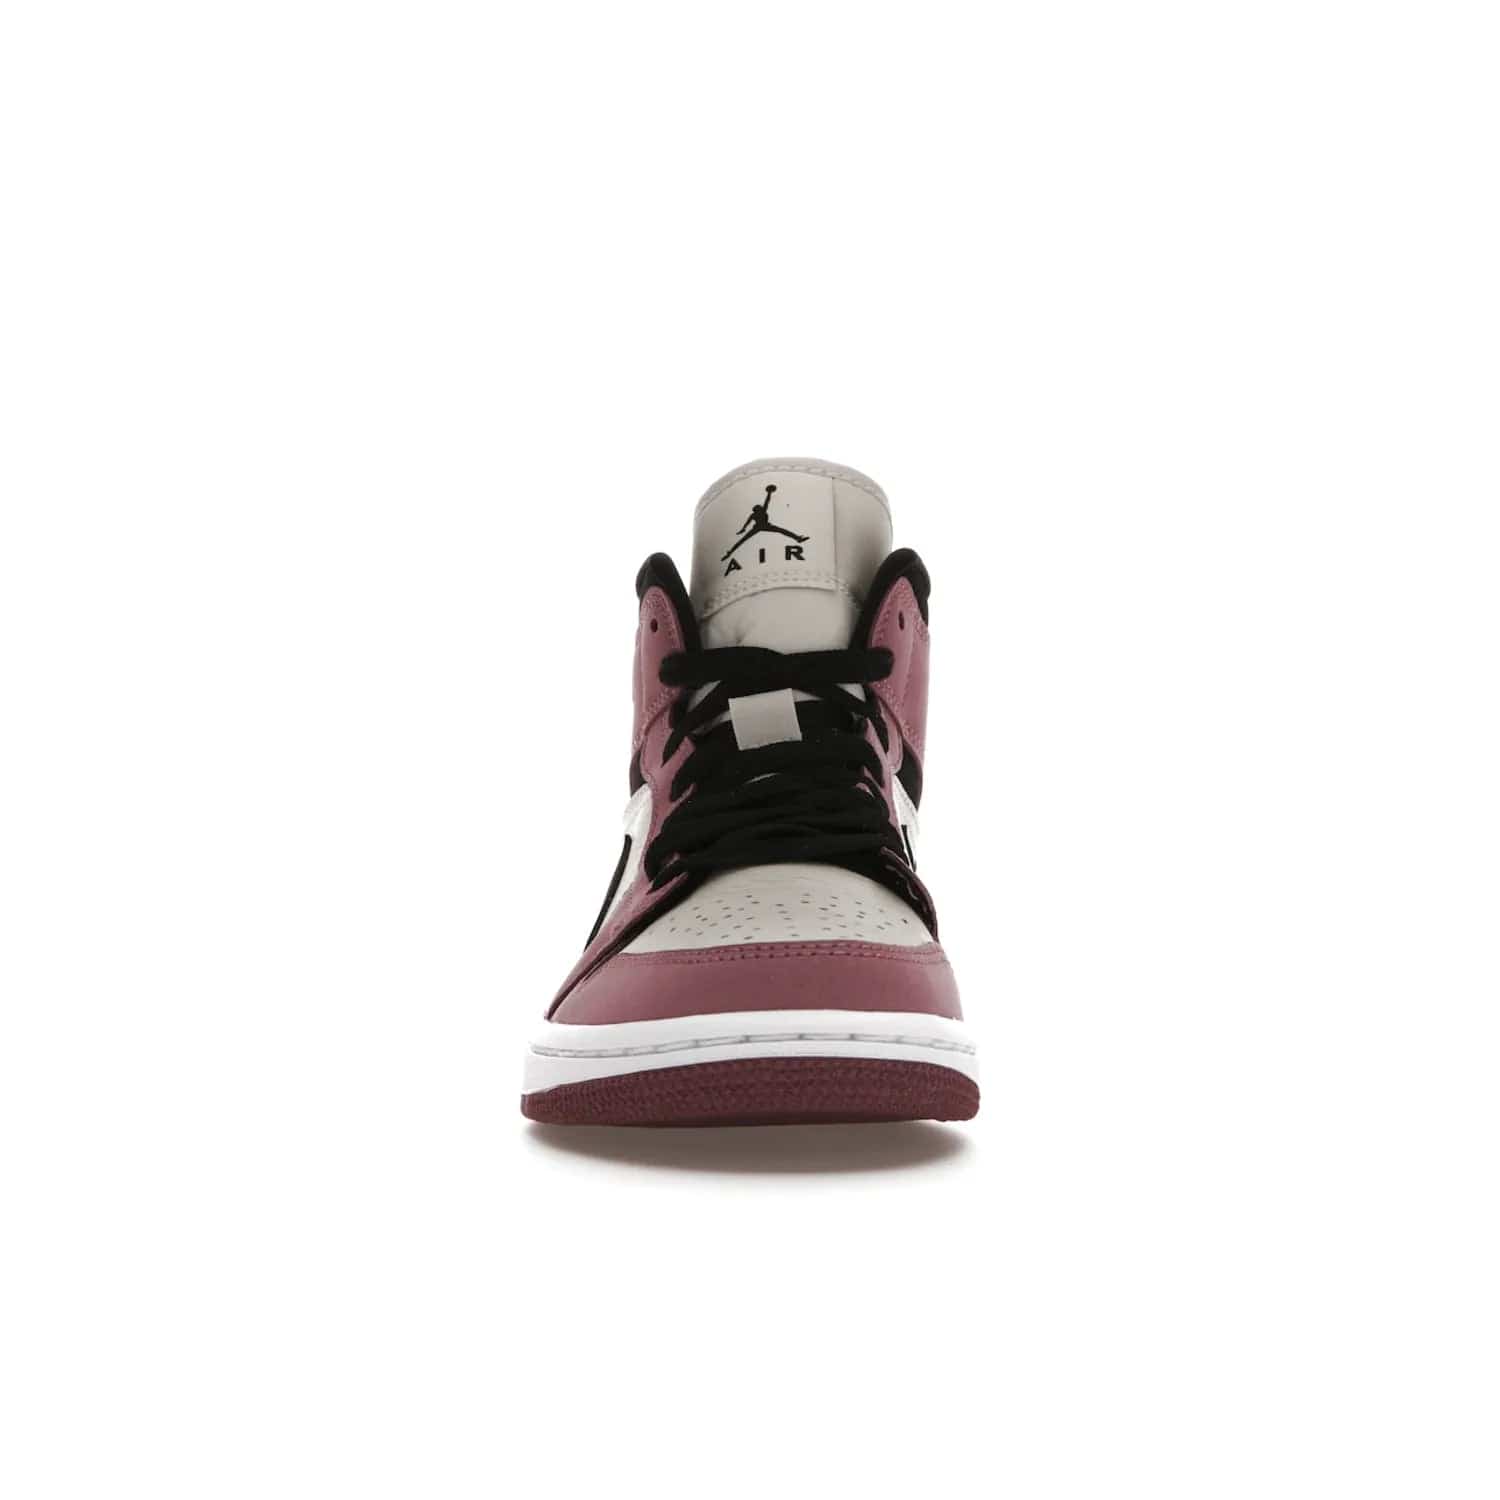 Jordan 1 Mid SE Light Mulberry (Women's) - Image 10 - Only at www.BallersClubKickz.com - Classic style meets performance with the Air Jordan 1 Mid Light Mulberry (Women's). Sleek leather overlays and light bone detailing bring out the best of this classic sneaker, perfect for the active woman on-the-go. Available March 2022.